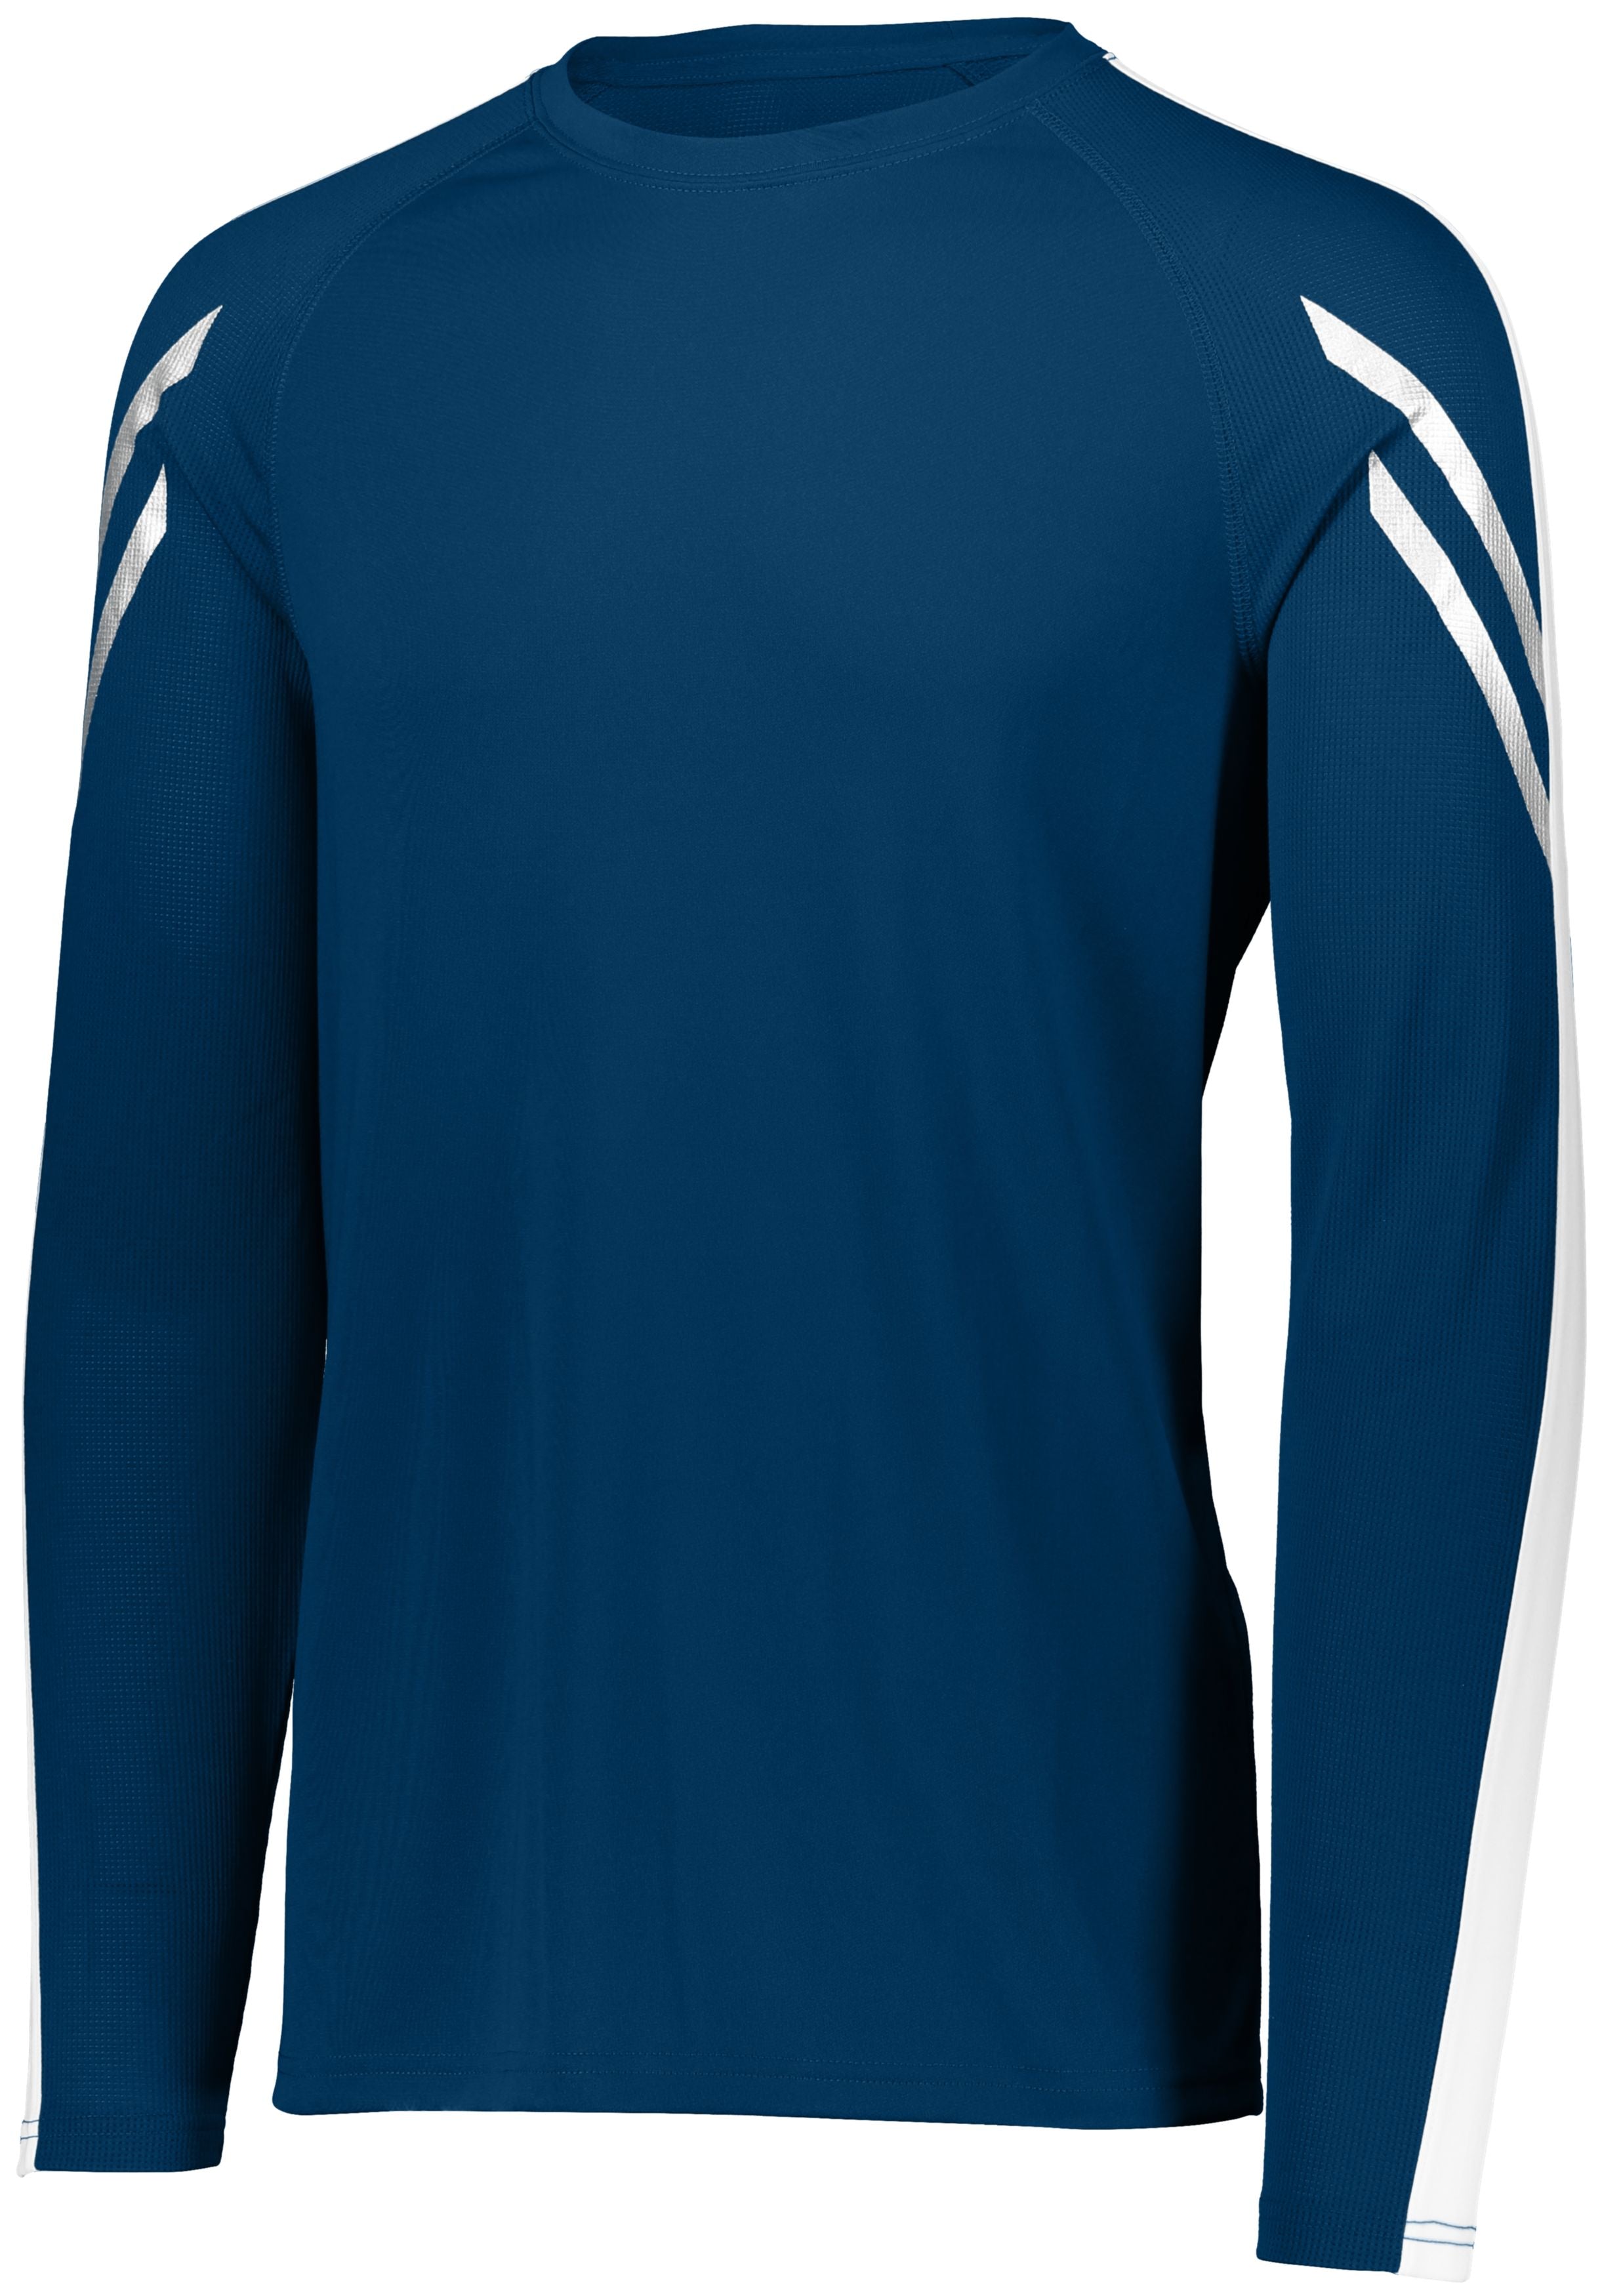 Holloway Flux Shirt Long Sleeve in Navy/White  -Part of the Adult, Holloway, Shirts, Flux-Collection product lines at KanaleyCreations.com